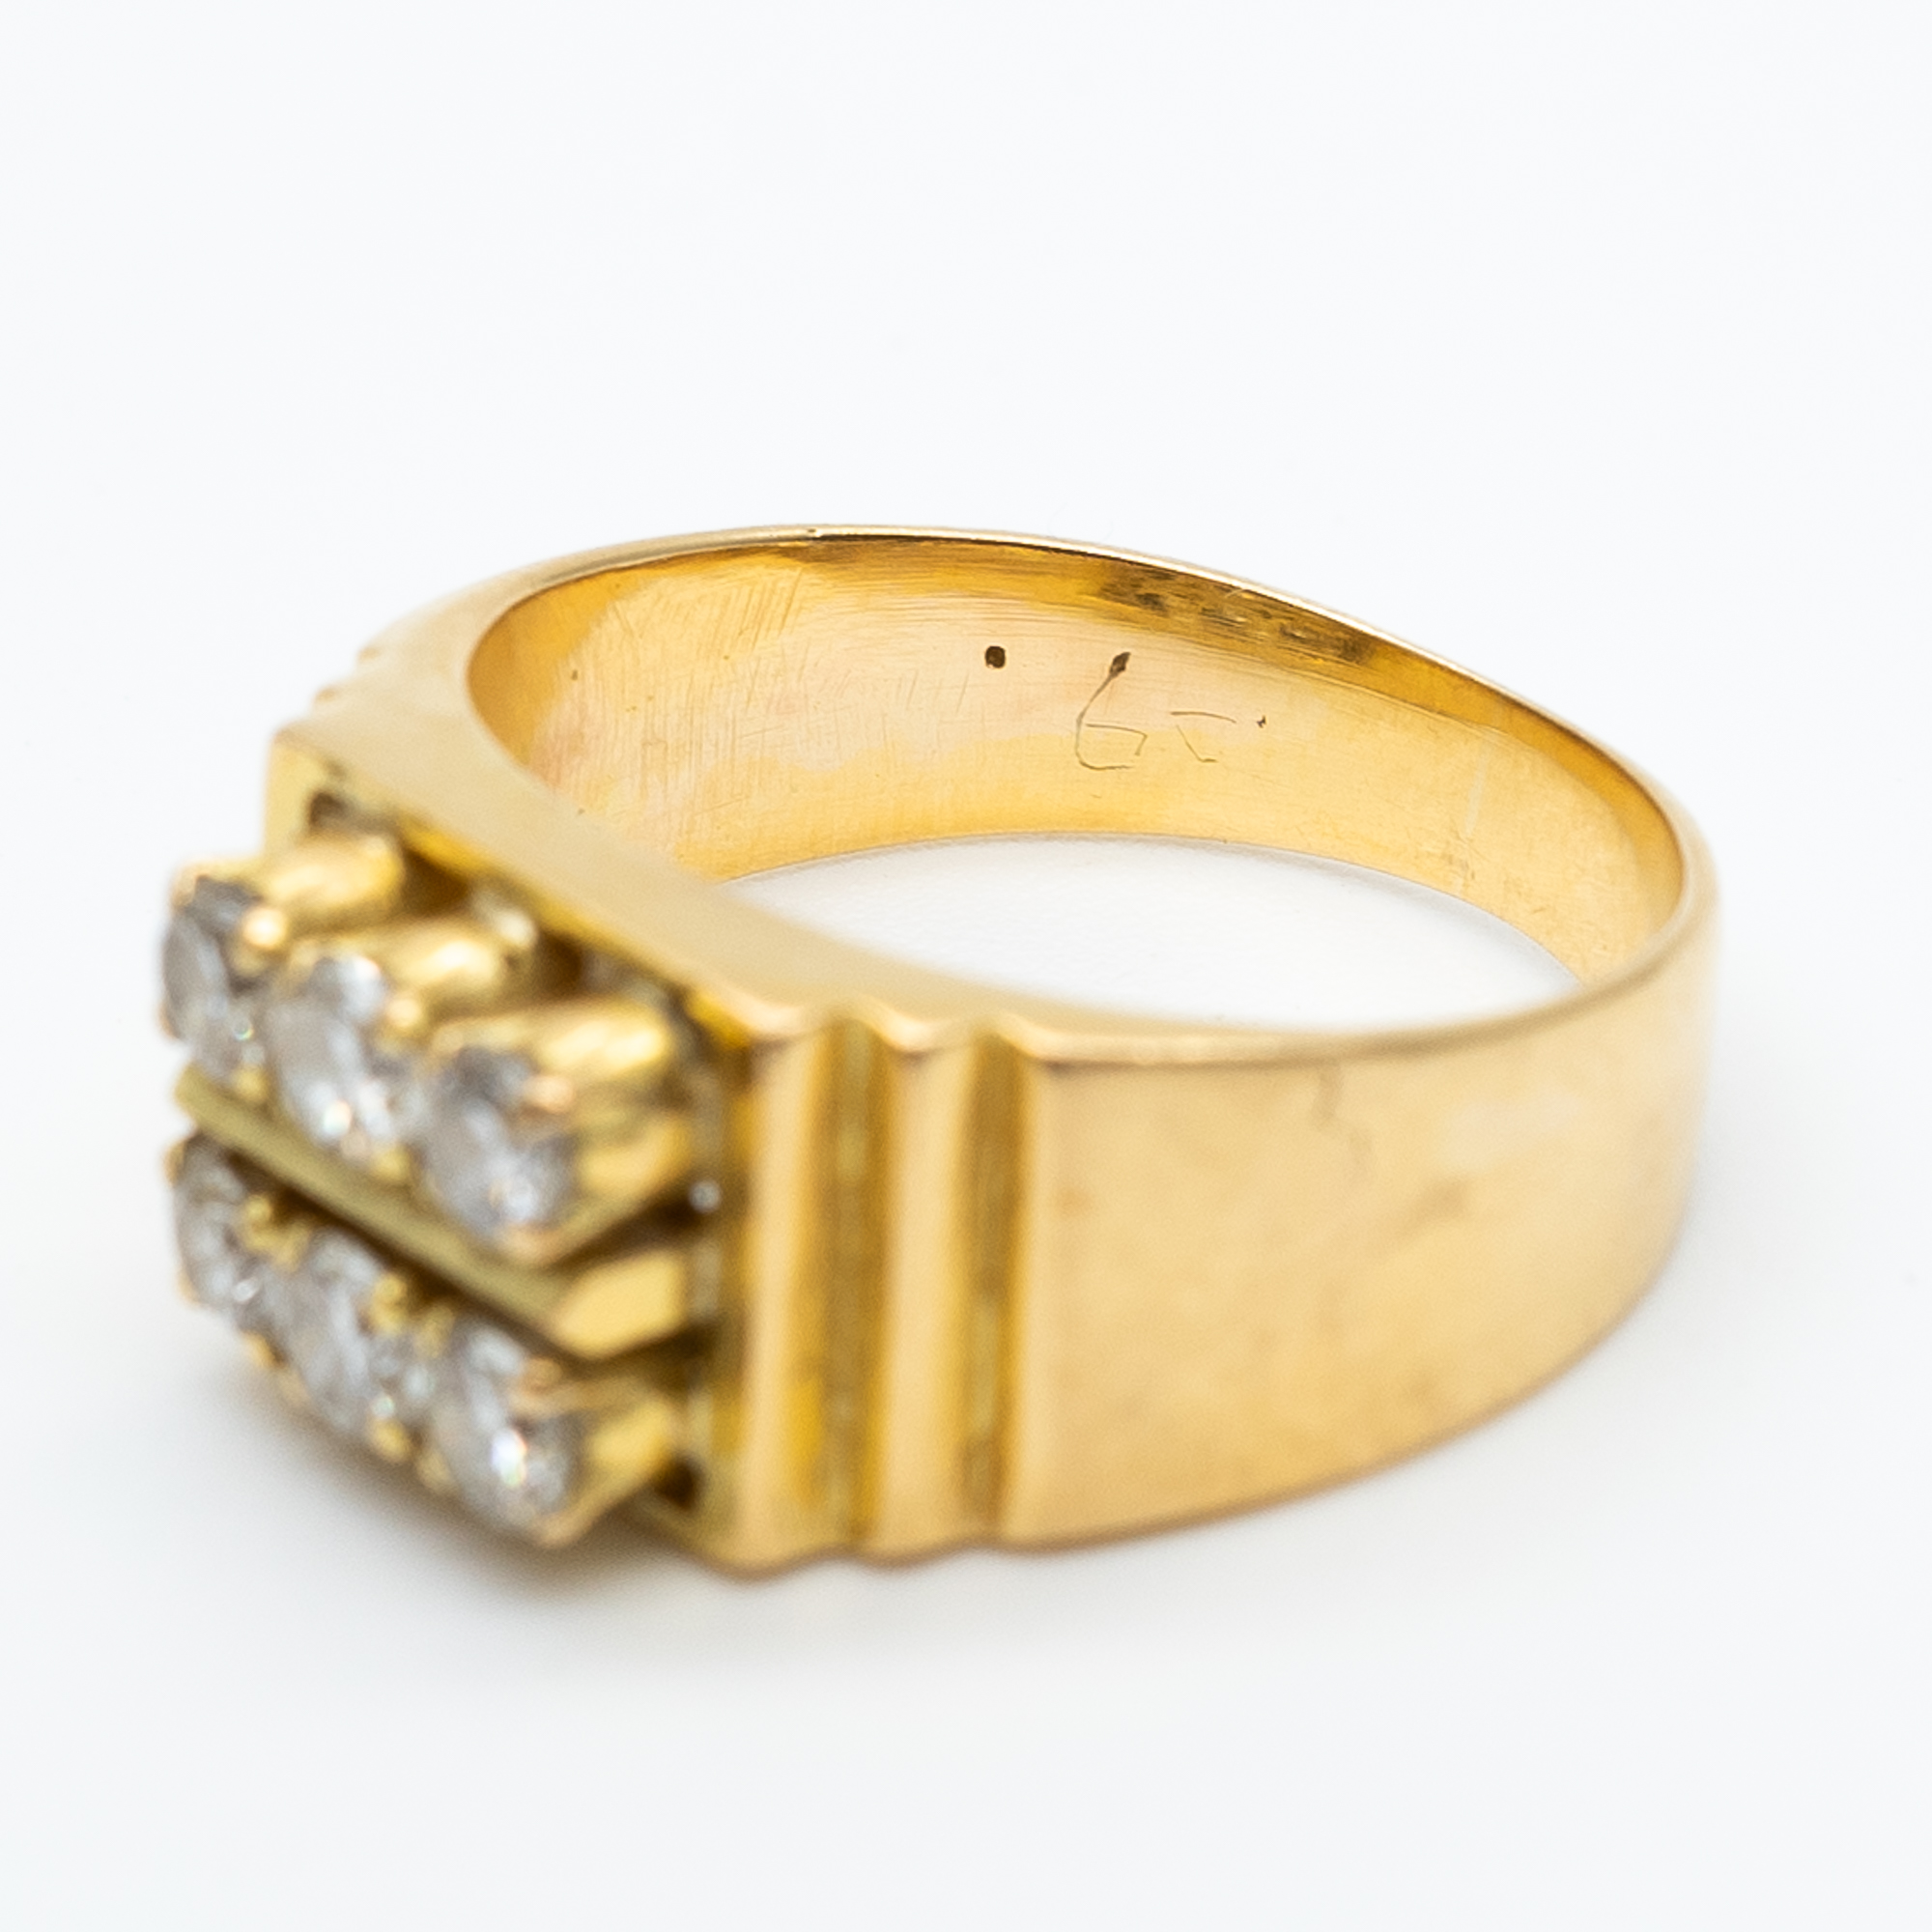 An 18ct yellow gold diamond signet ring - Image 2 of 4